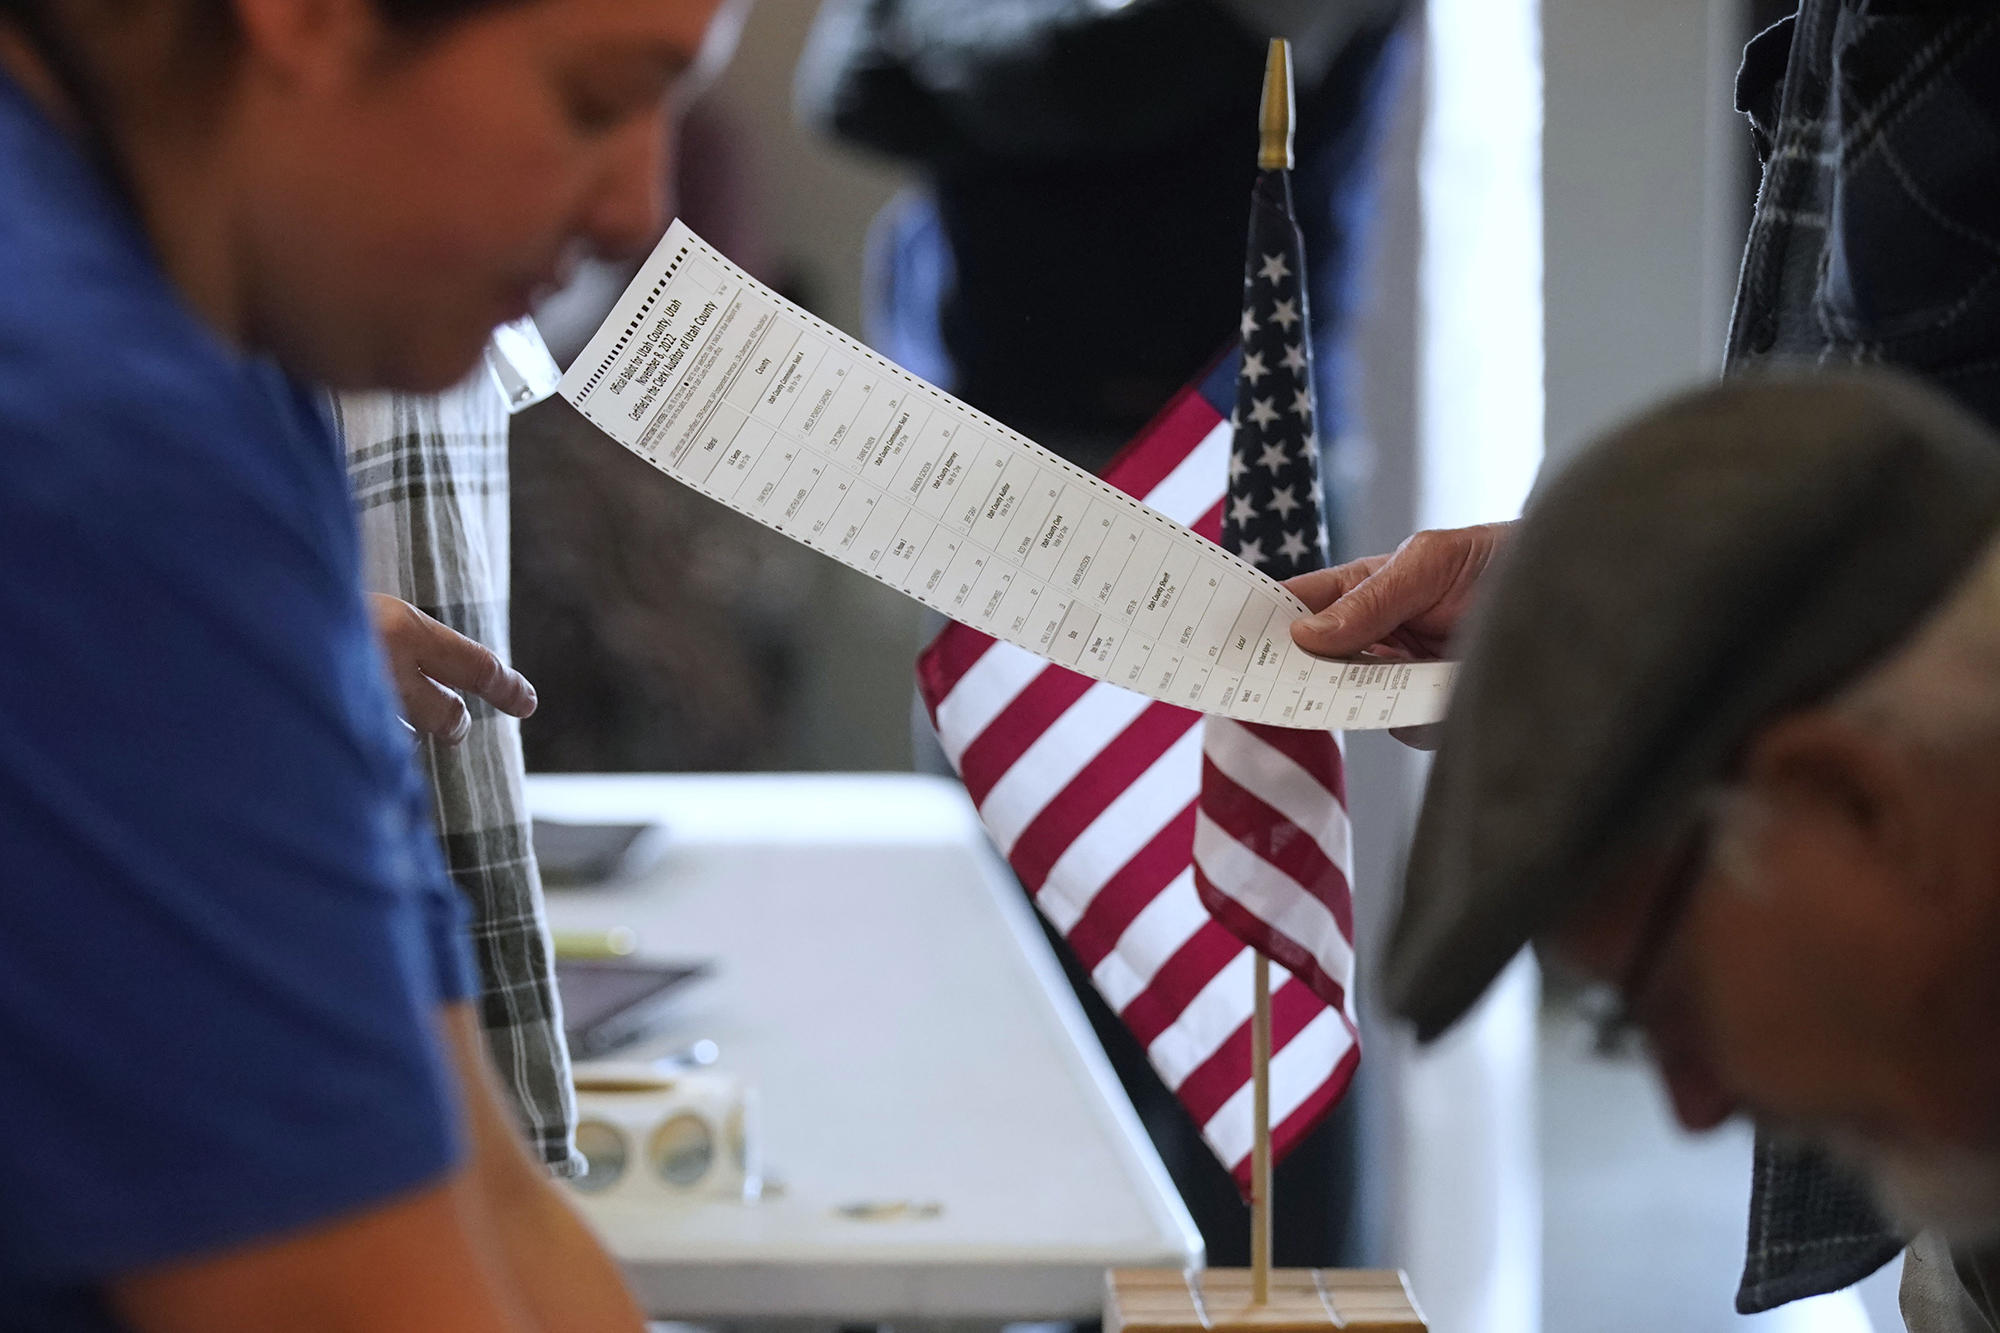 A voter looks over his ballot before voting at the Center Point Church in Orem, Utah, on Tuesday.